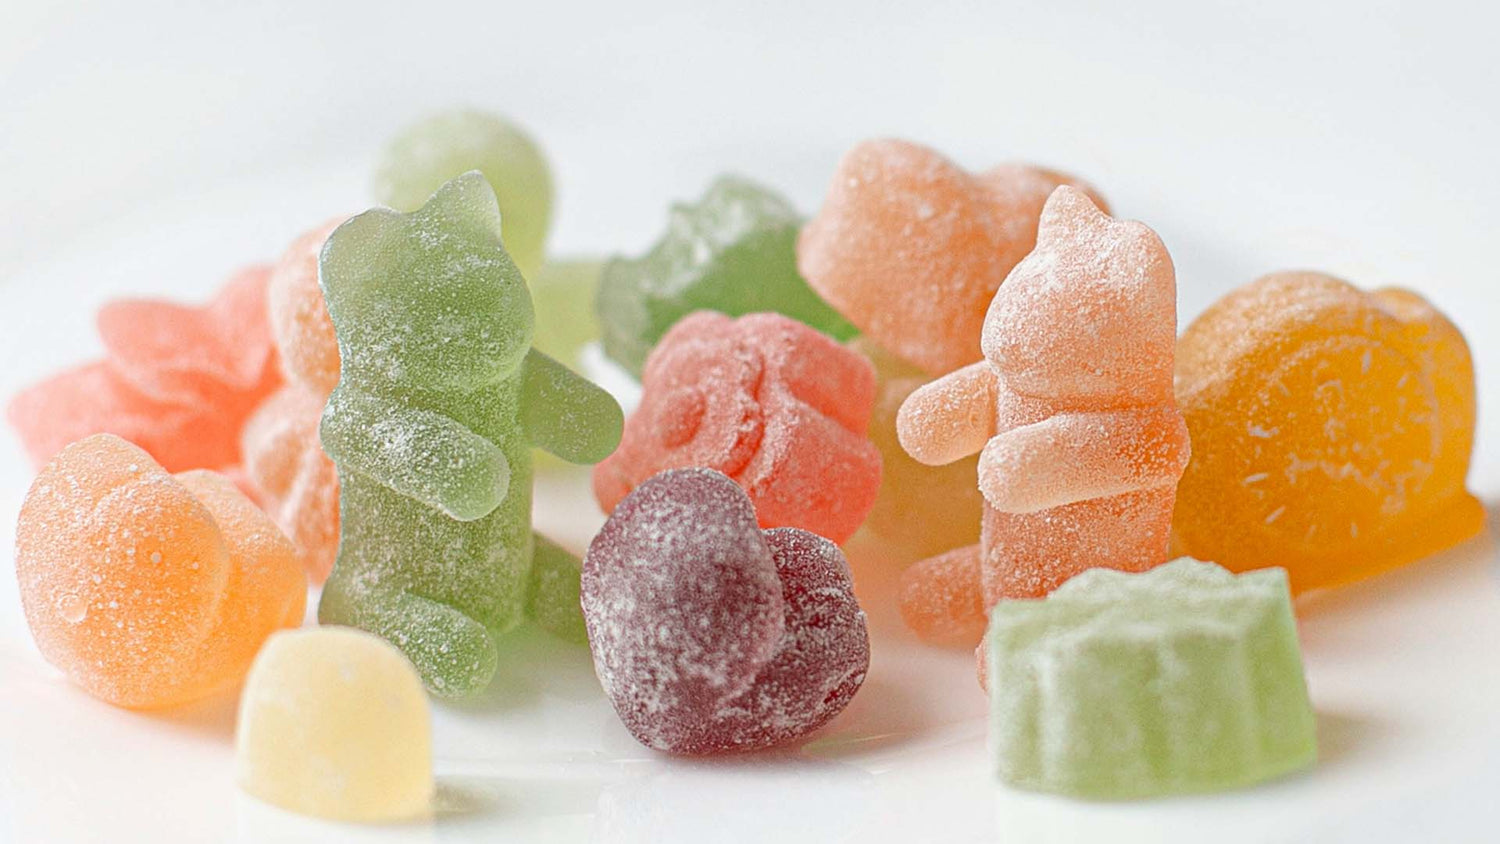 Mixture of gummies in different colors and shapes